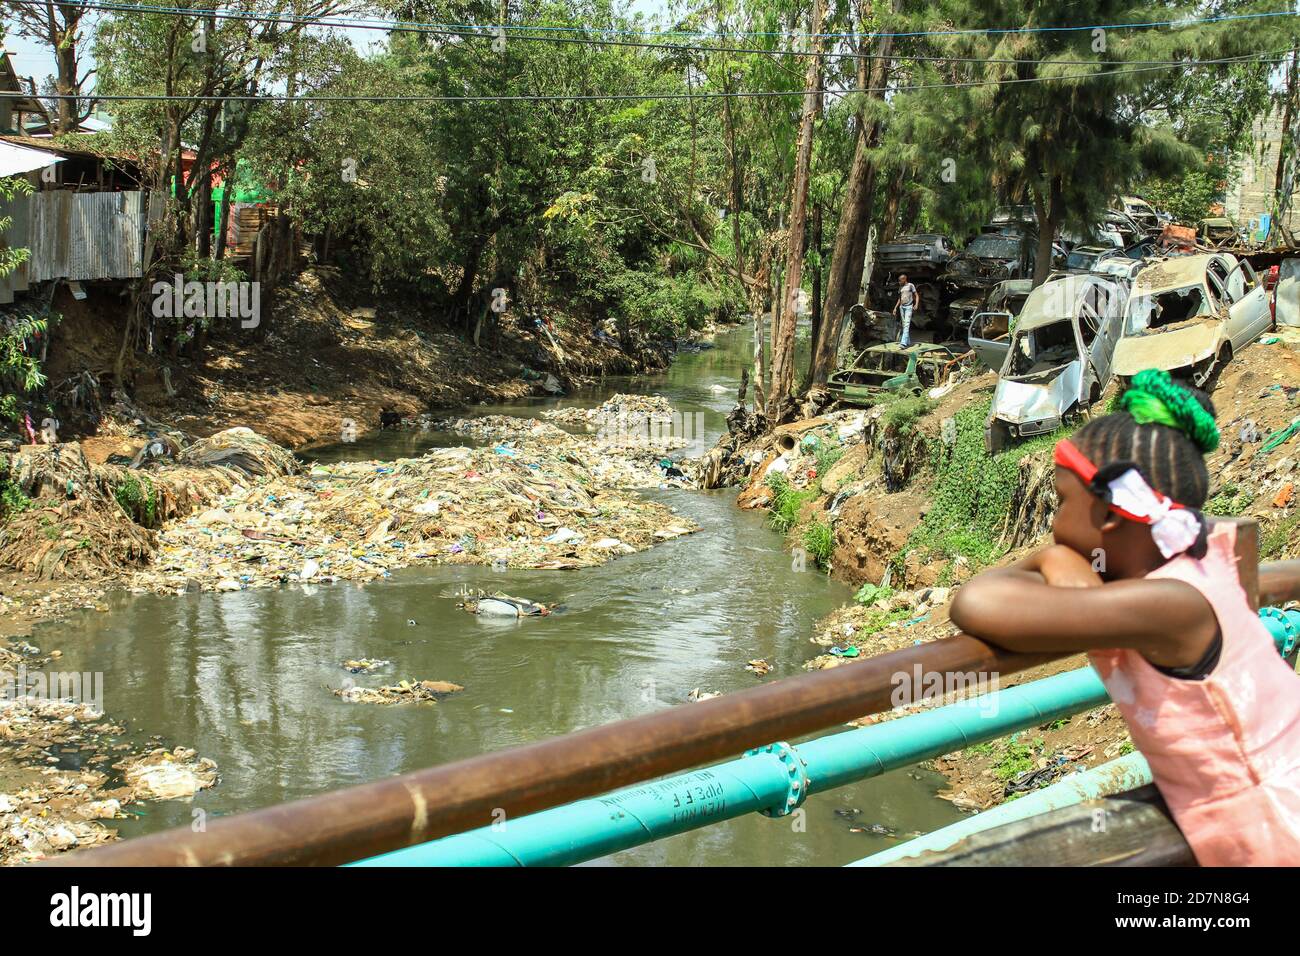 A young girl looks at a section of  the heavily polluted Nairobi River that passes through Dandora dumpsite in the outskirts of Nairobi.Dandora dumpsite which is Nairobi’s biggest dumpsite receives an average of 2,000 metric tonnes of waste daily, most of it being mixed waste composed of largely compostable, metal, electronic, plastic among others. Recently there has been concern from Kenyans after a leaked letter written by the American Petro-Chemical Lobby Group, urging American Trade Negotiators to request Kenyan government to lessen its tough stance on plastic restrictions and to make Keny Stock Photo